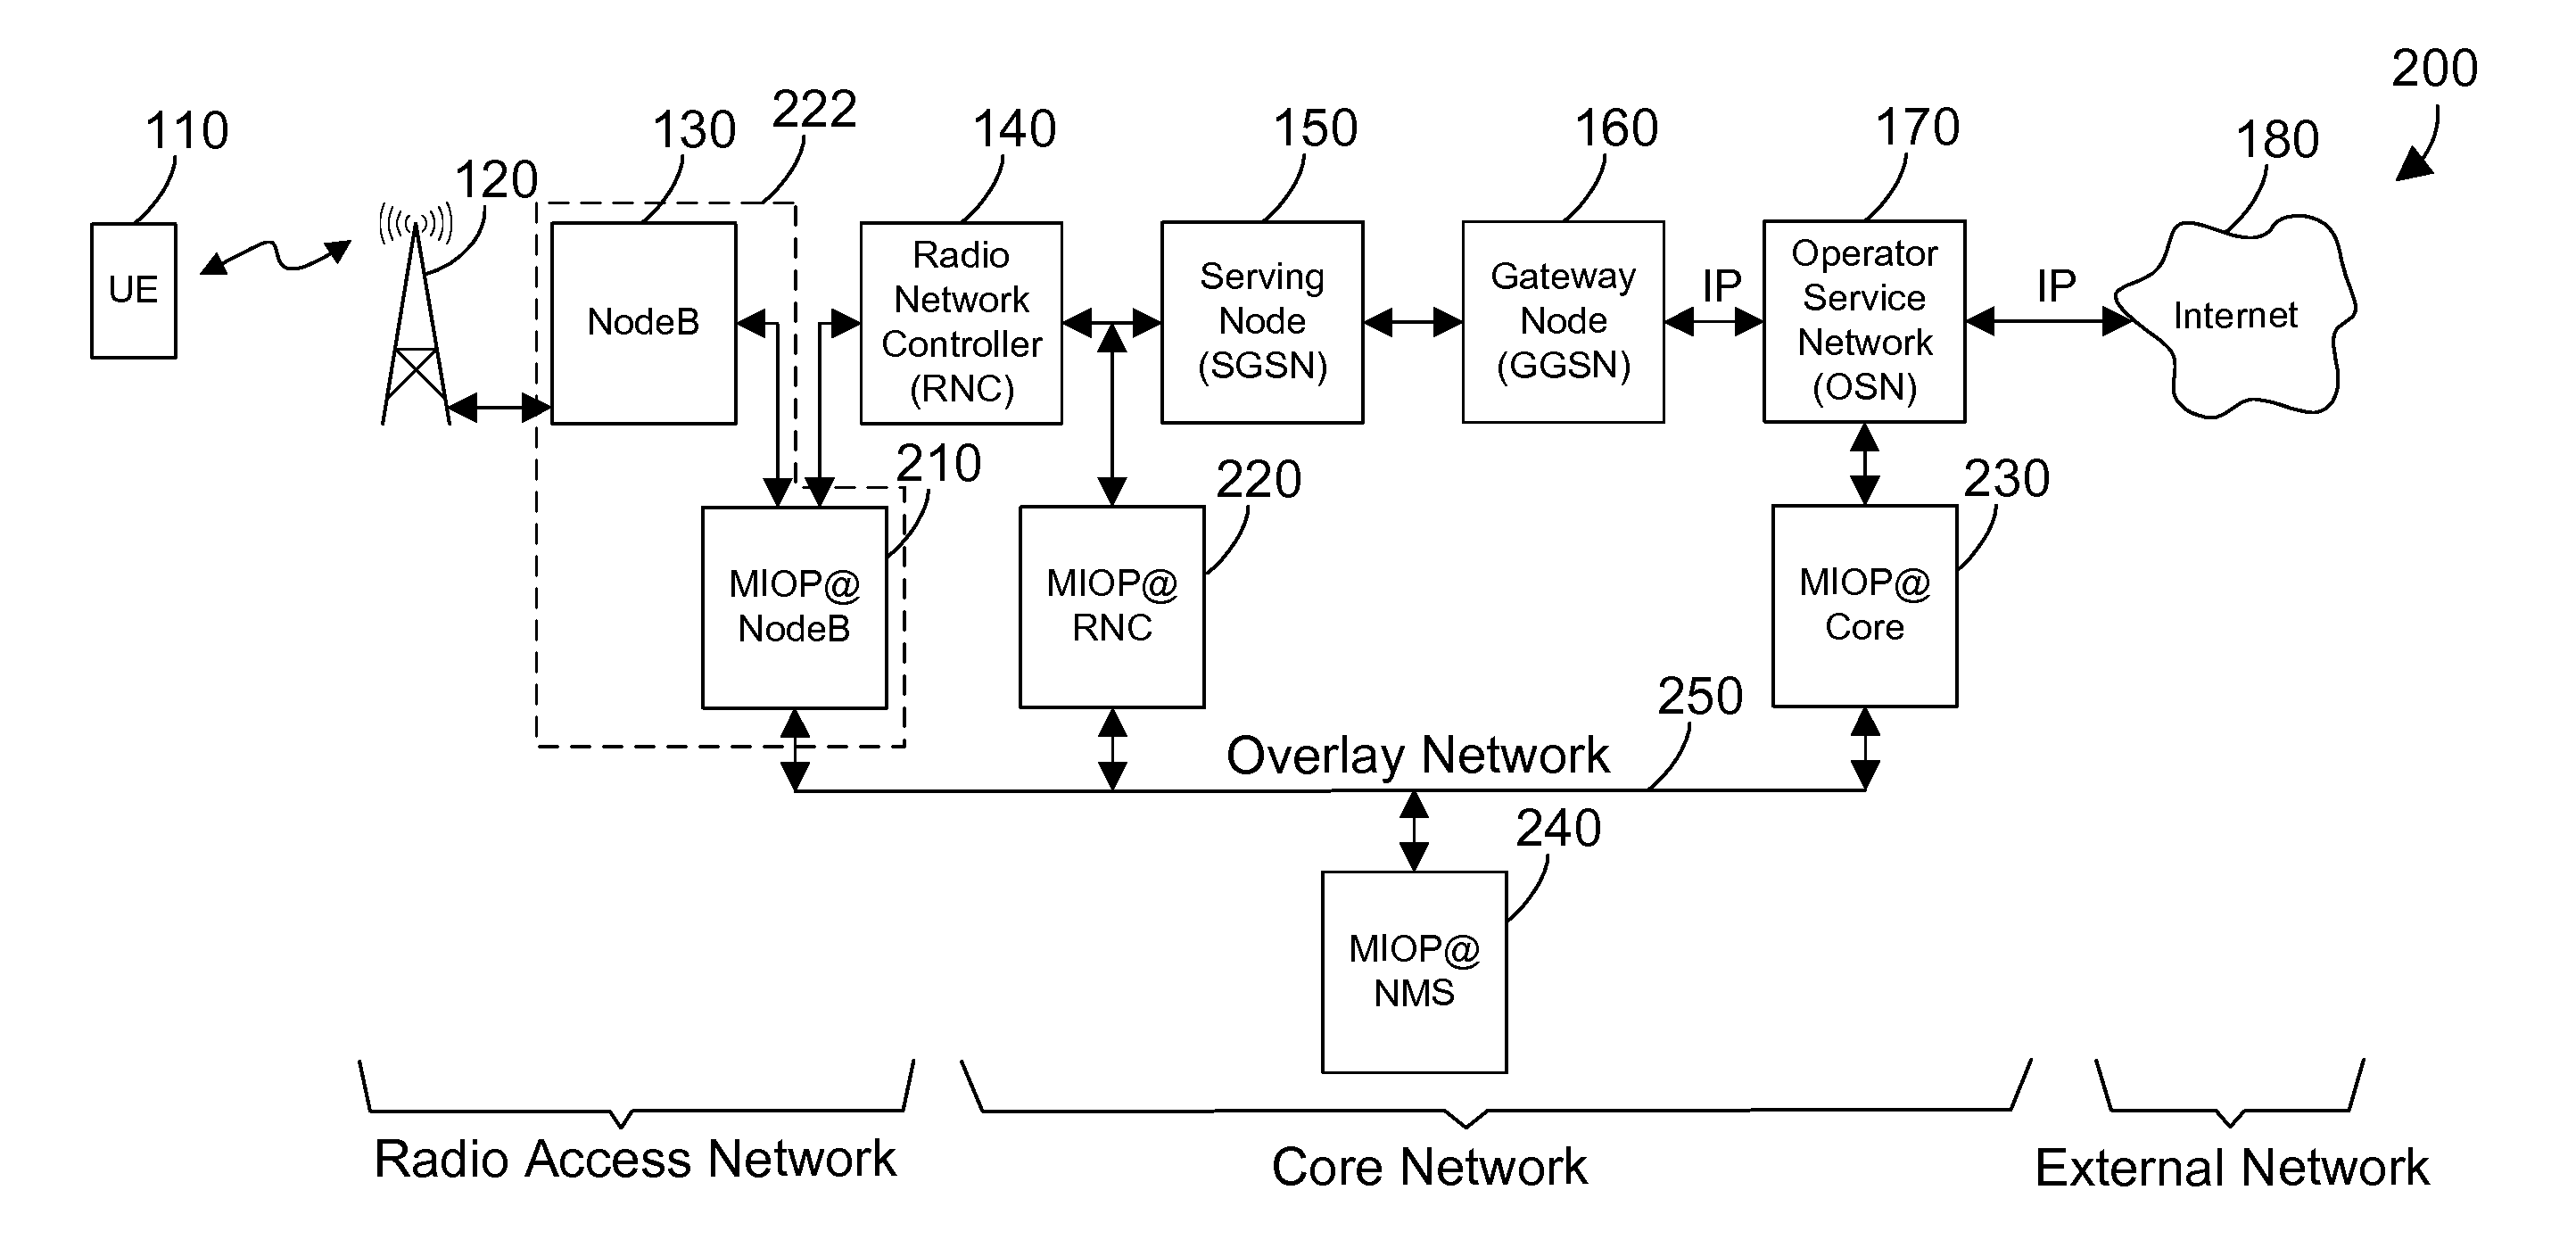 Autonomic error recovery for a data breakout appliance at the edge of a mobile data network